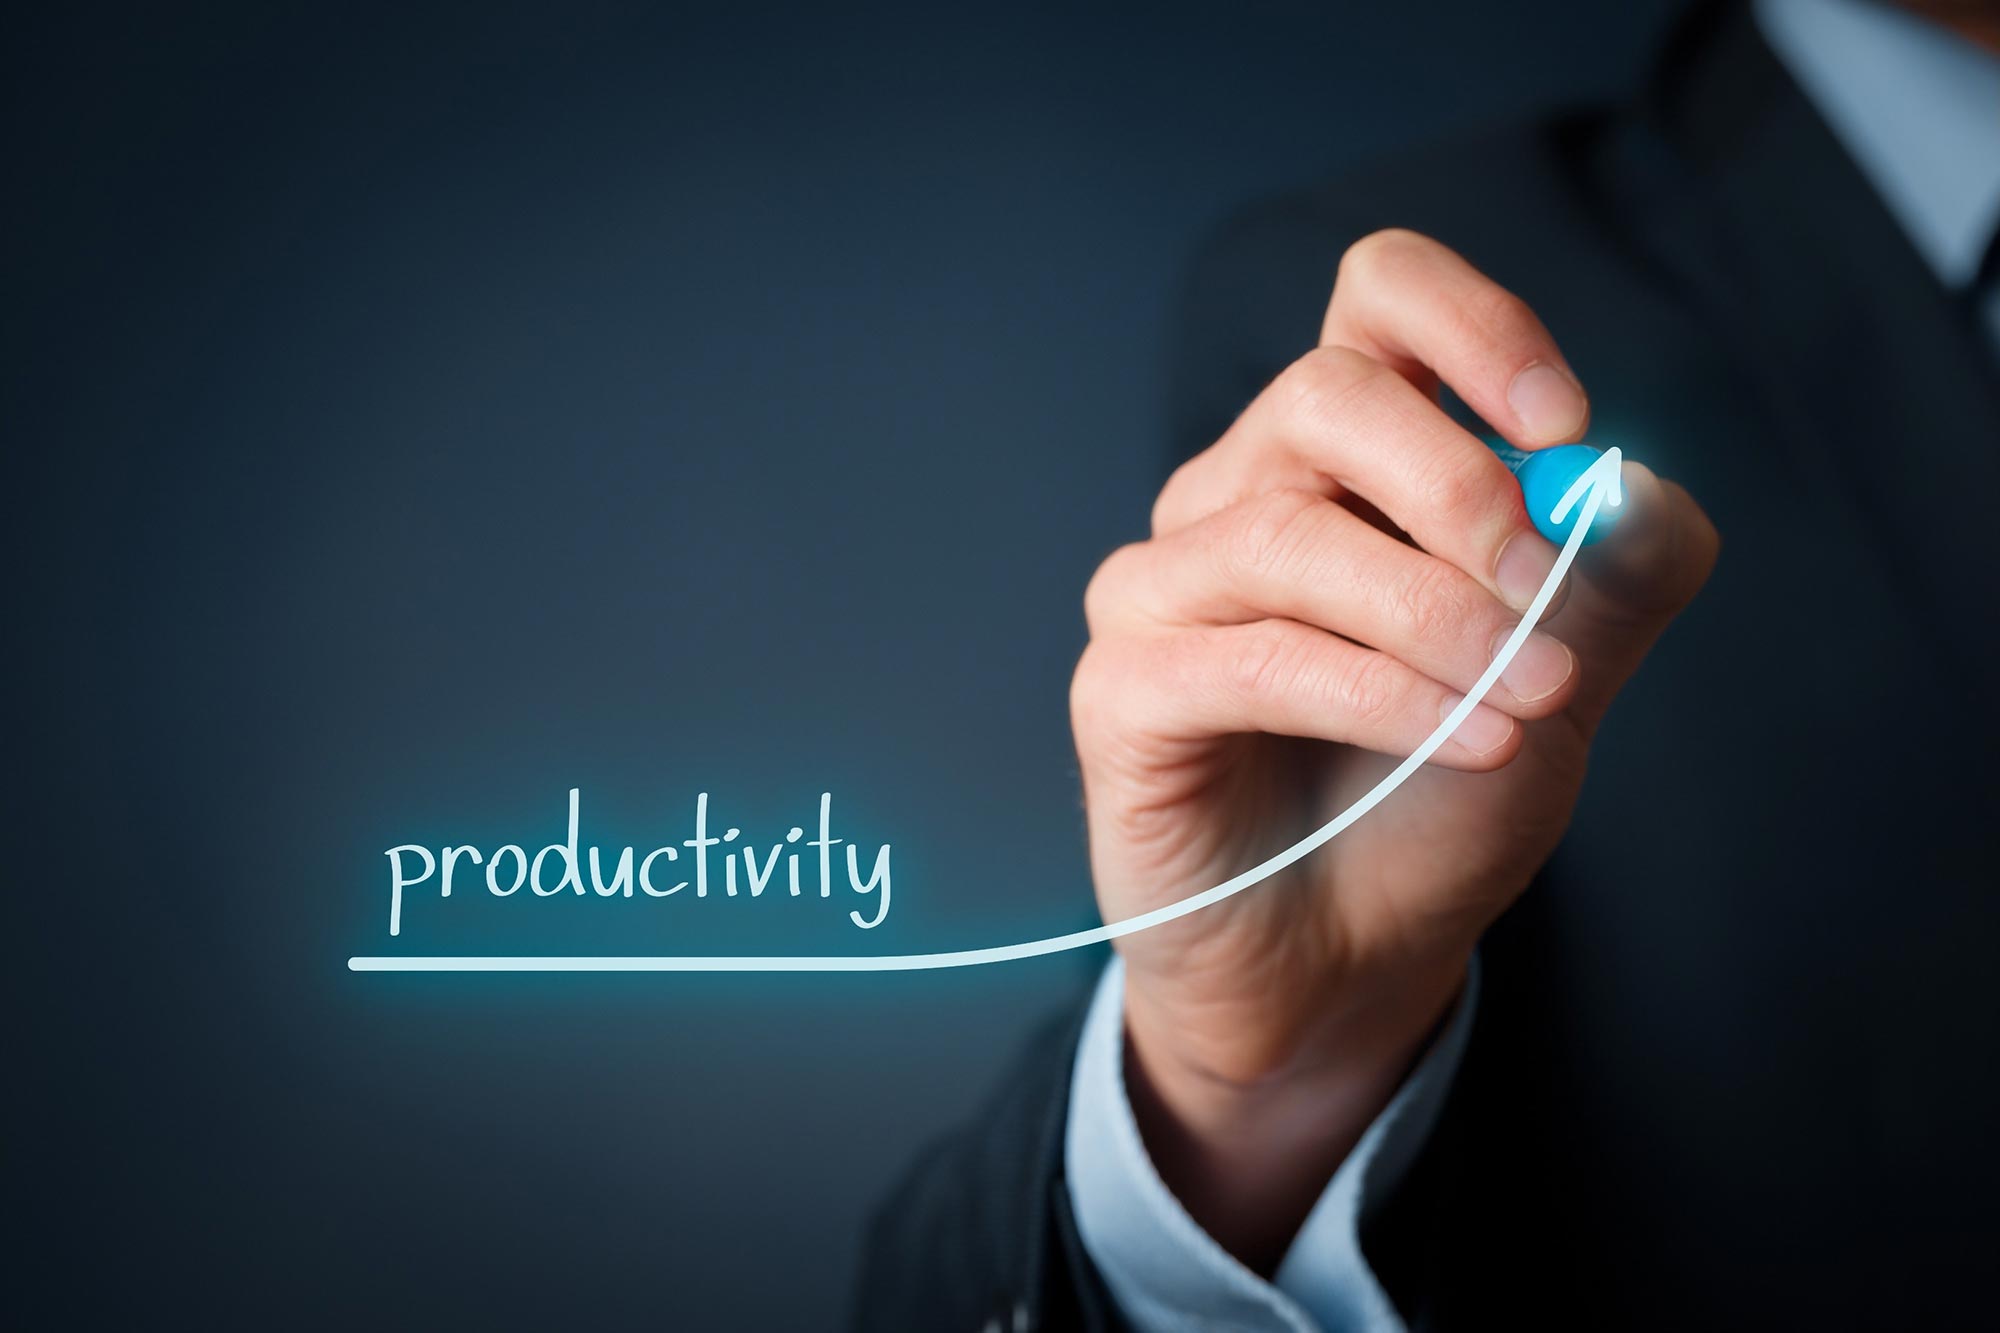 What can you do about productivity?